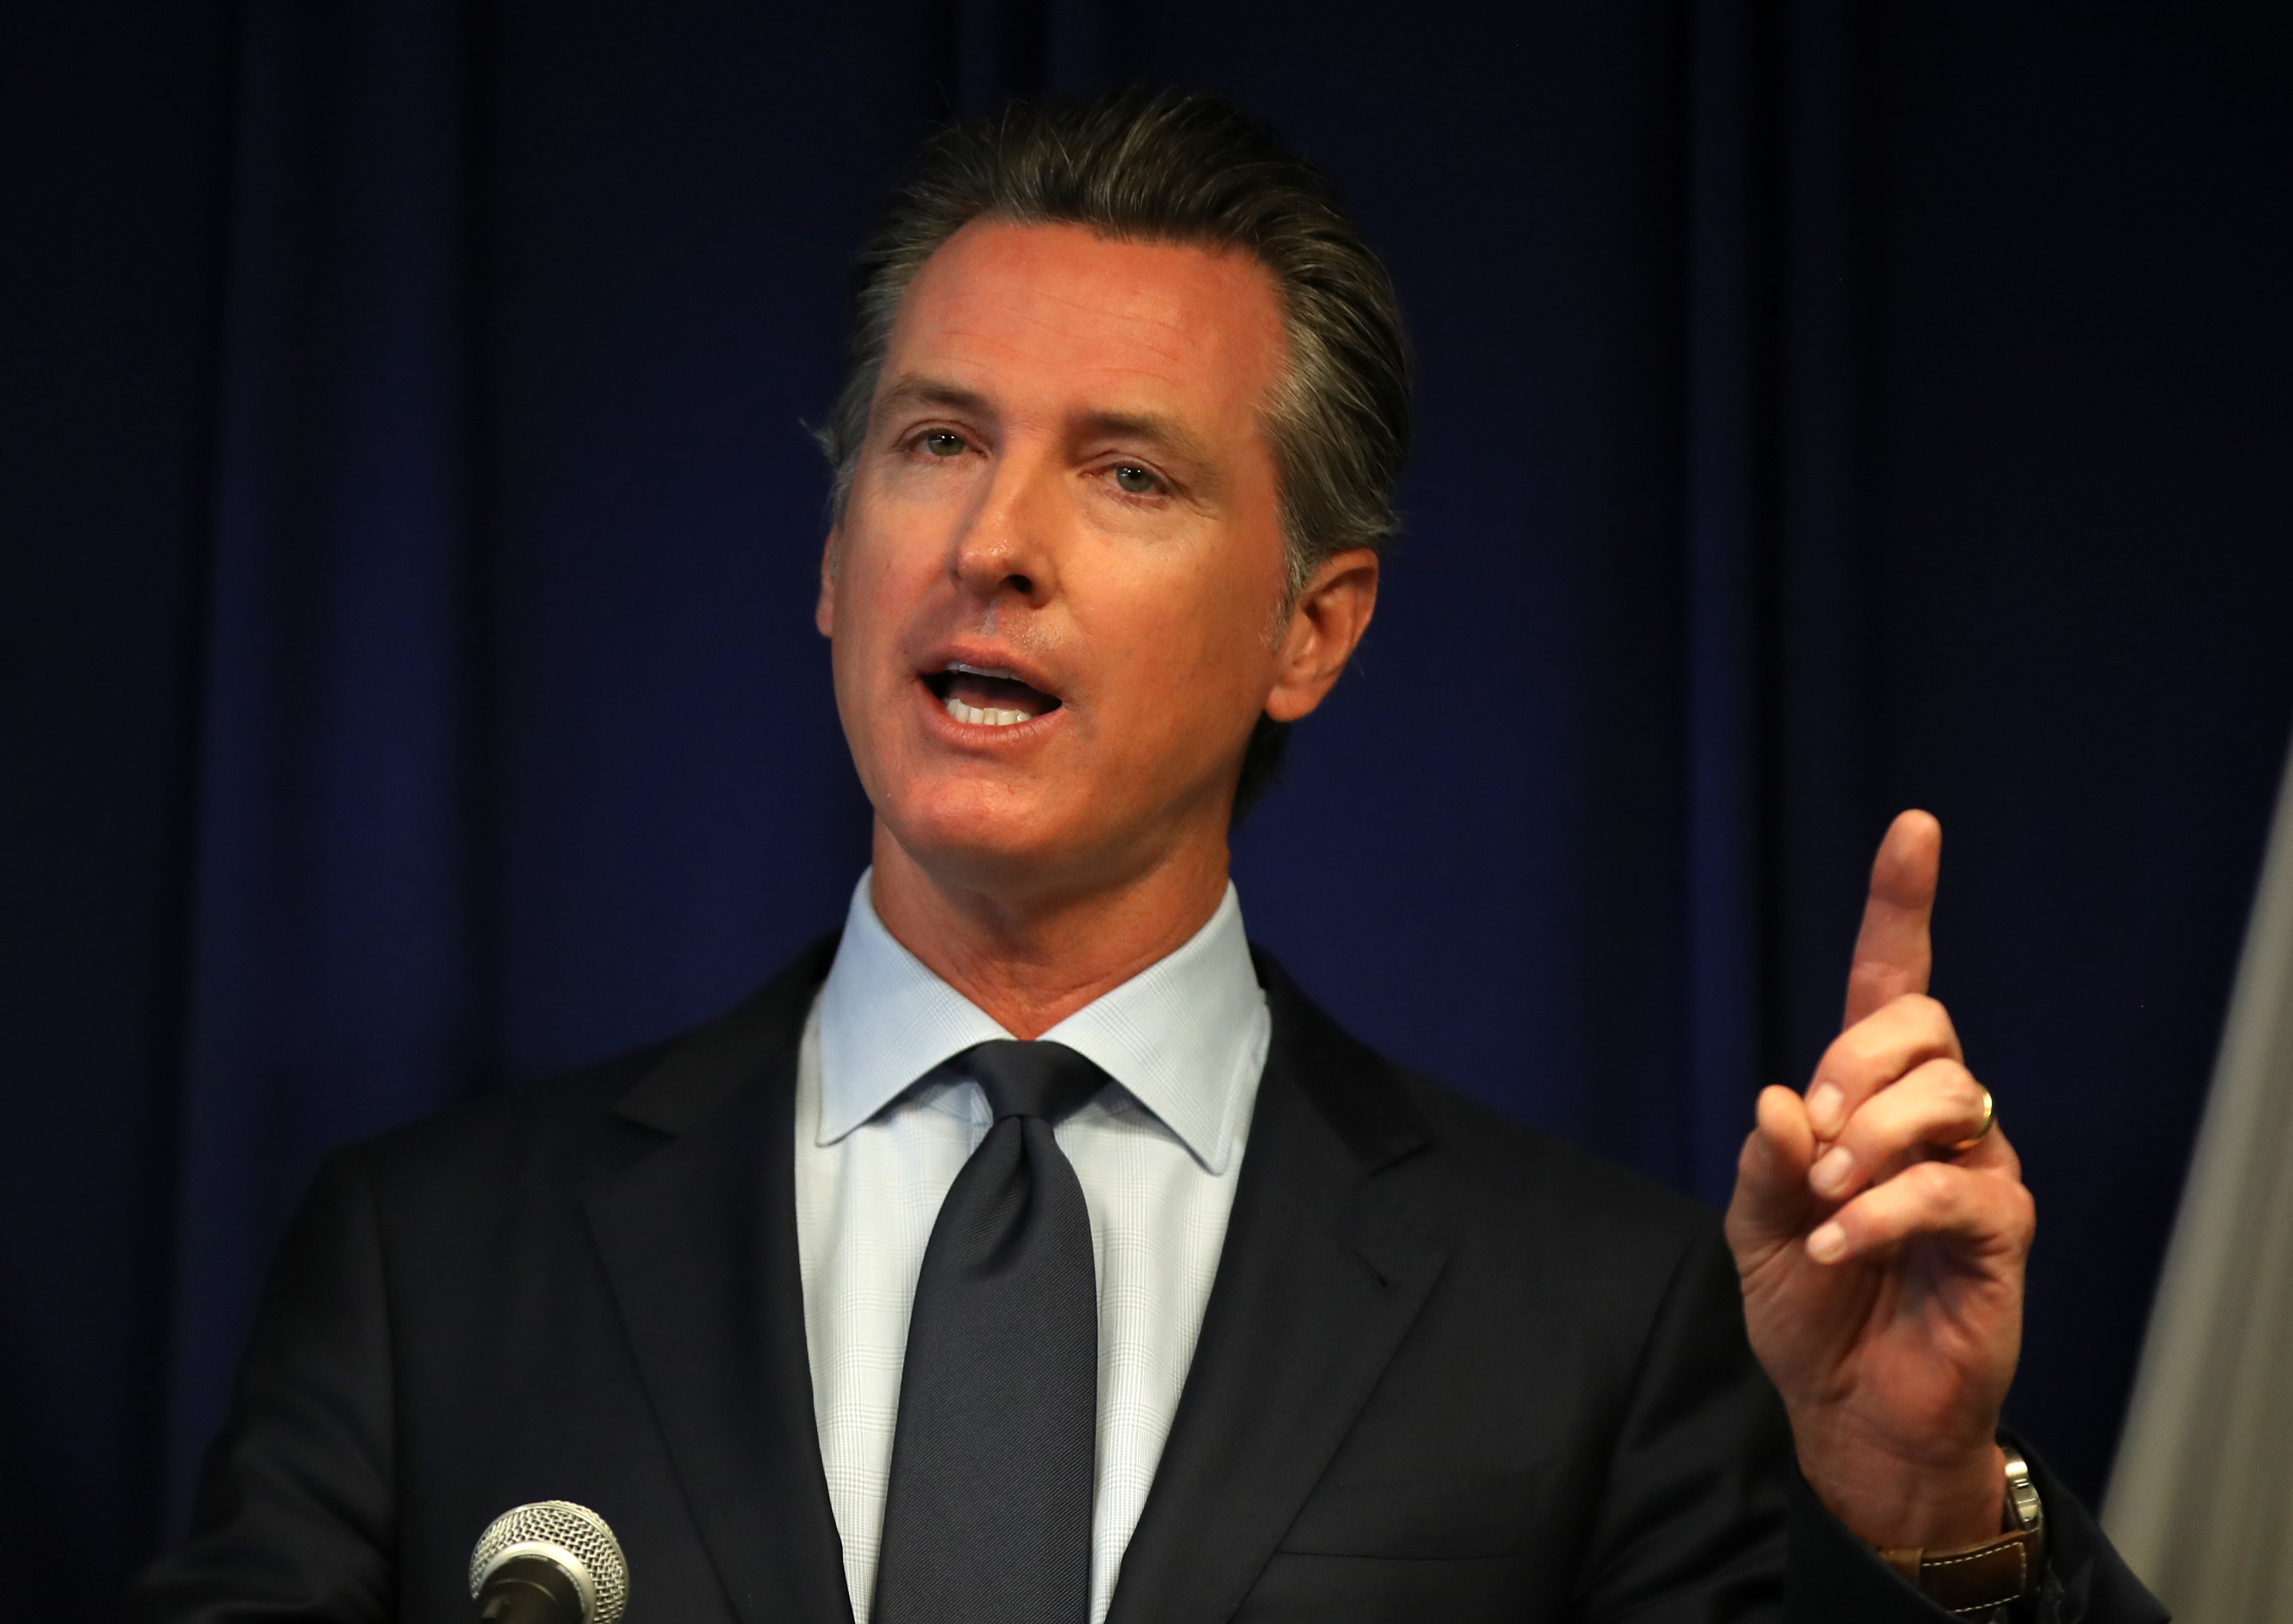 California Gov. Newsom And CA Attorney Gen. Becerra Hold News Conference Responding To Trump Revoking State’s Emissions Waiver